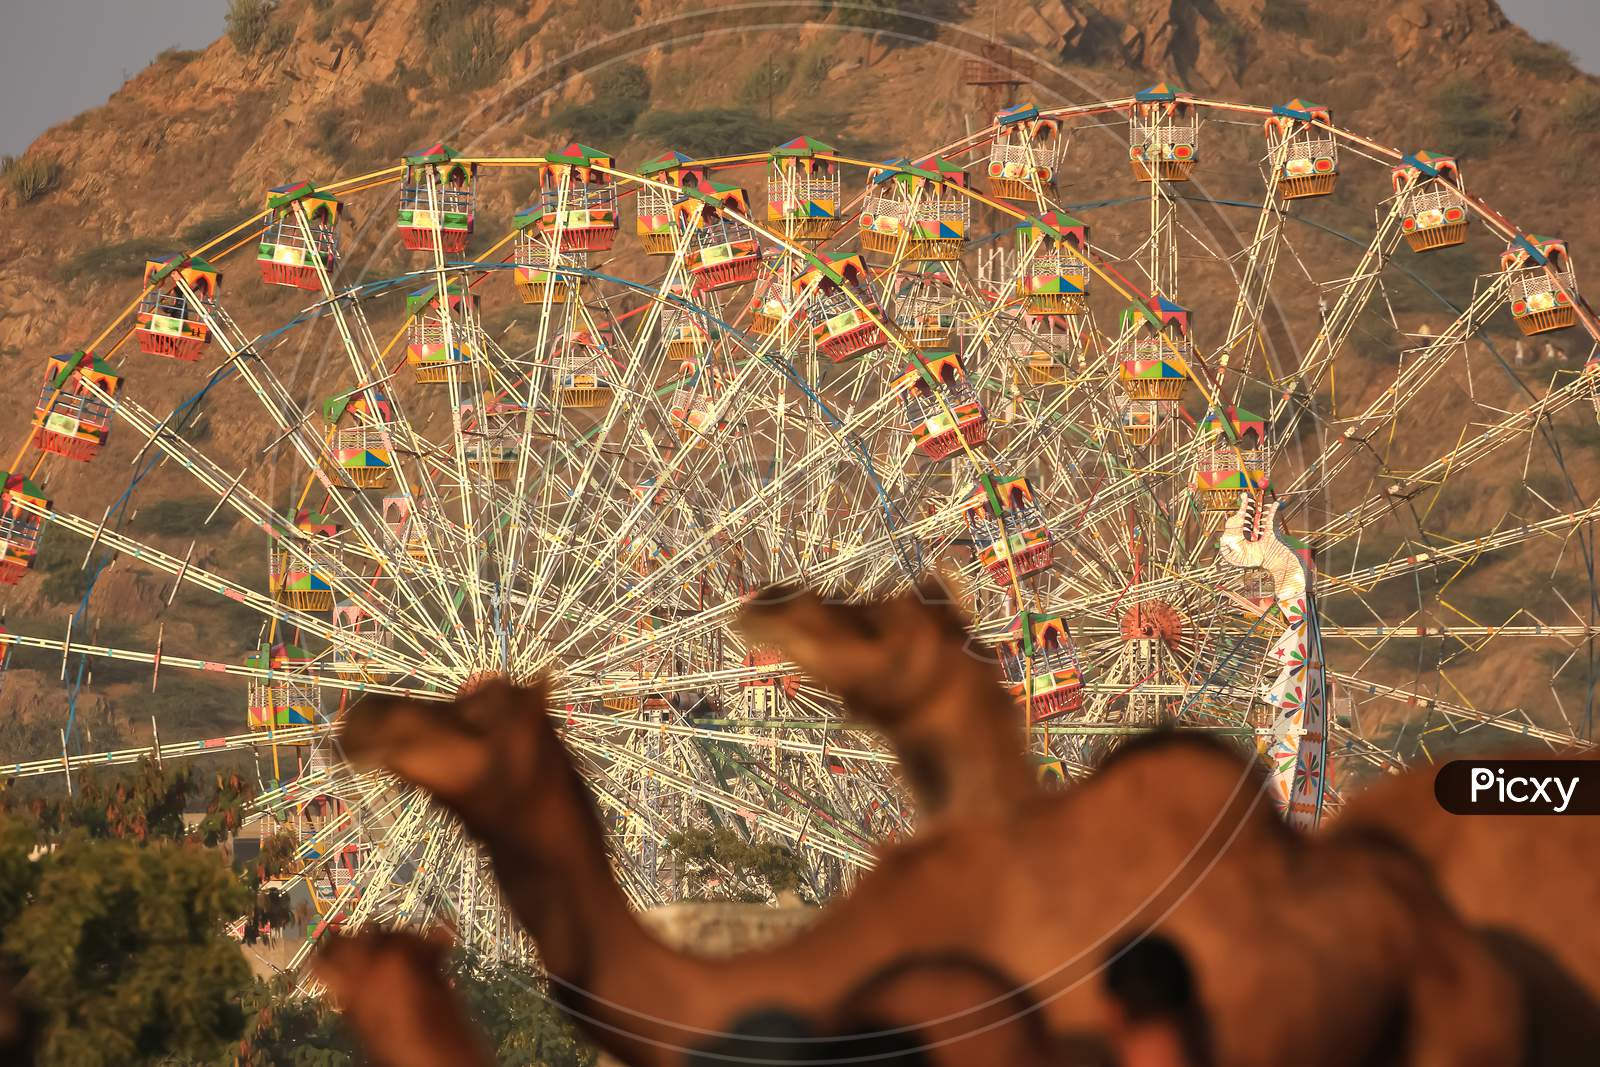 Selective focus image of camels in the fore ground blurred and giant wheel ride